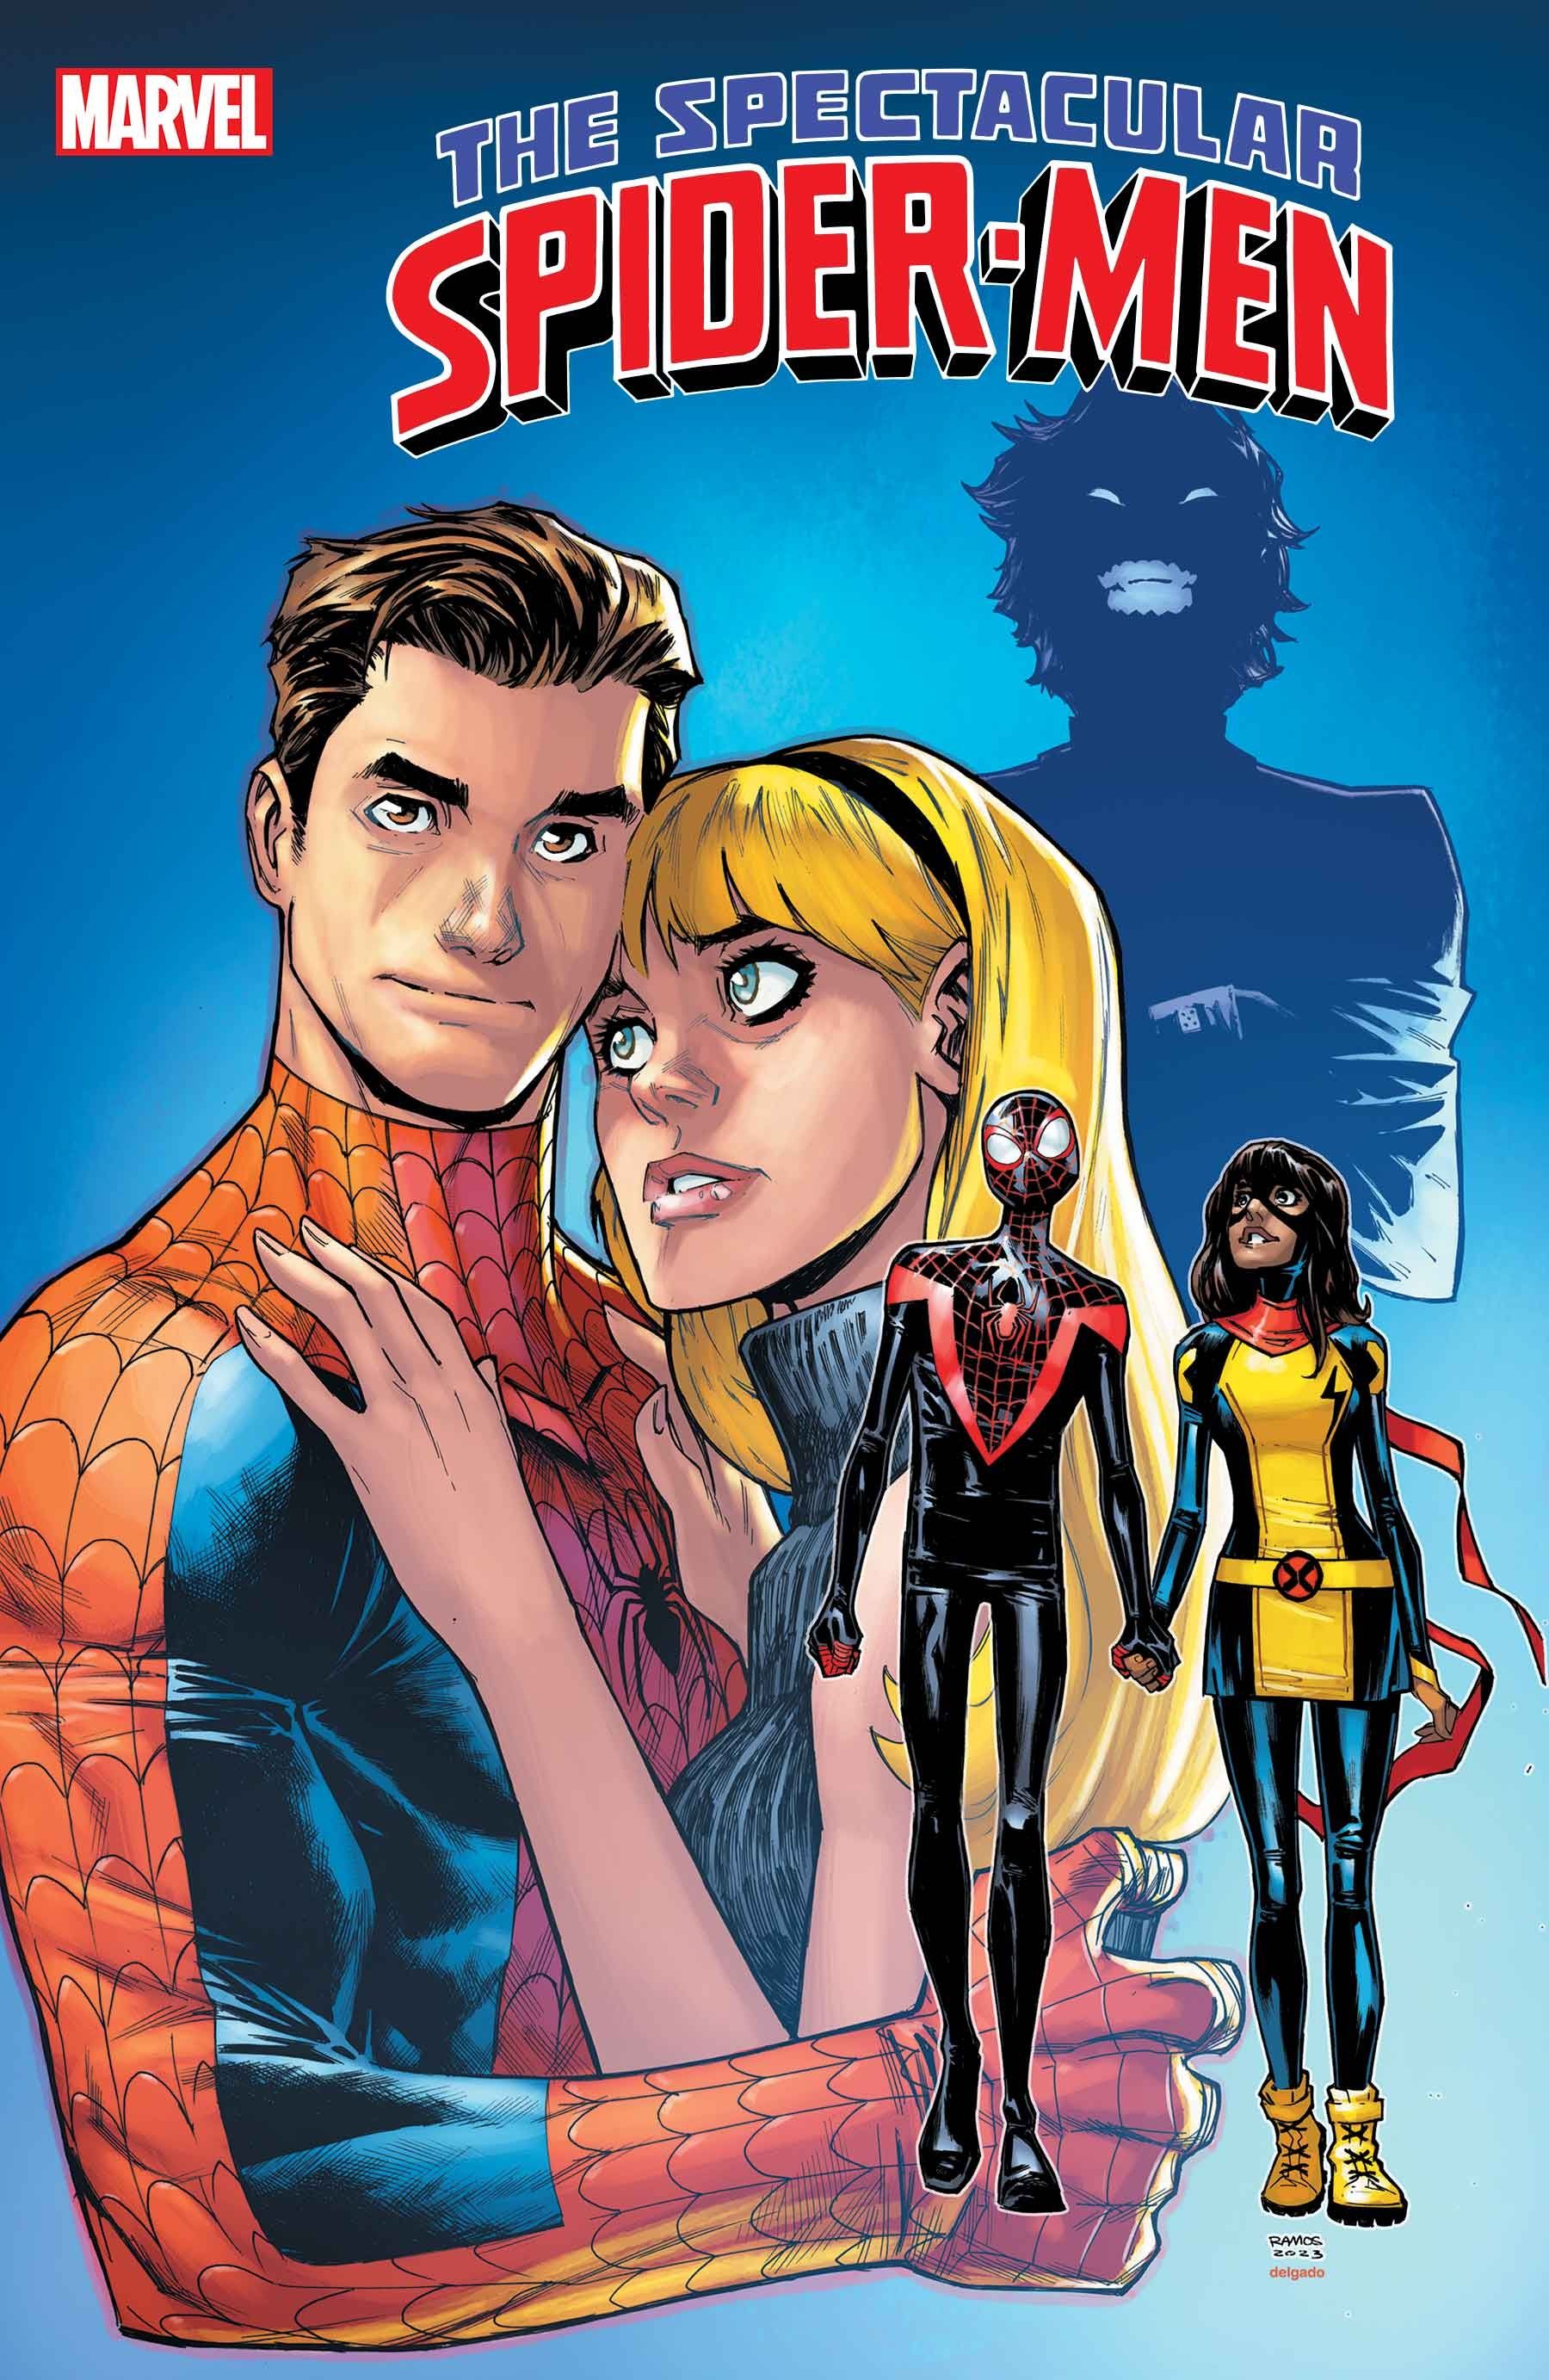 Spectacular Spider-Men #3 cover, Spider-Man holds Gwen Stacy; Miles and Kamala walk hand in hand.